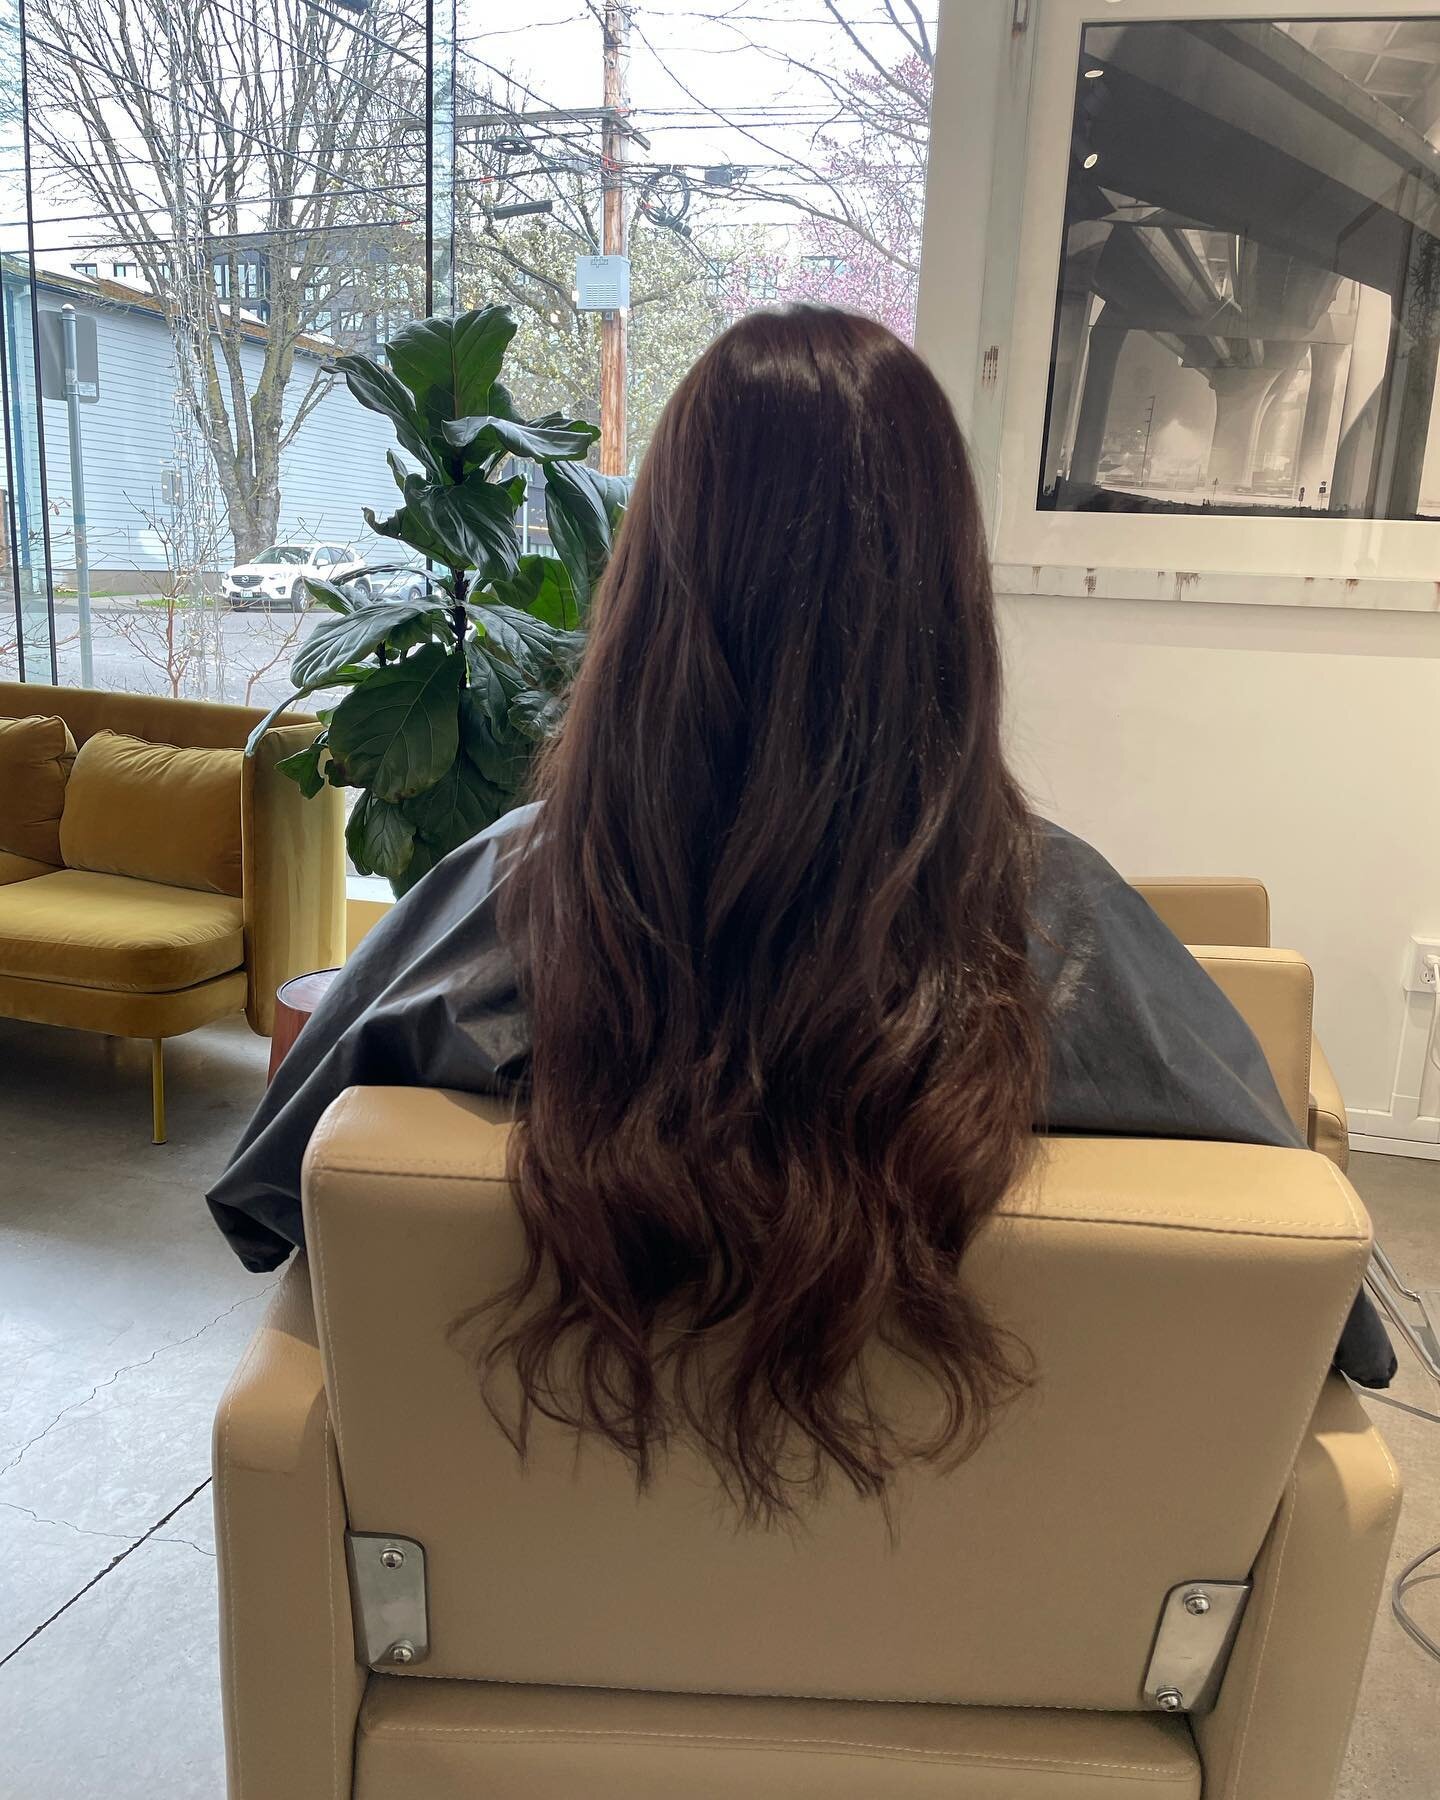 2 days from having a baby! Her hair is ready to meet you.!!🌈#pdxhair #pdxhairstylist #pdxhairextensions #portlandhairstylist #portlandhairsalon #portlandhairextensions #hairextensions #behindthechairstylist#portlandoregonhairextensions #remyhairexte